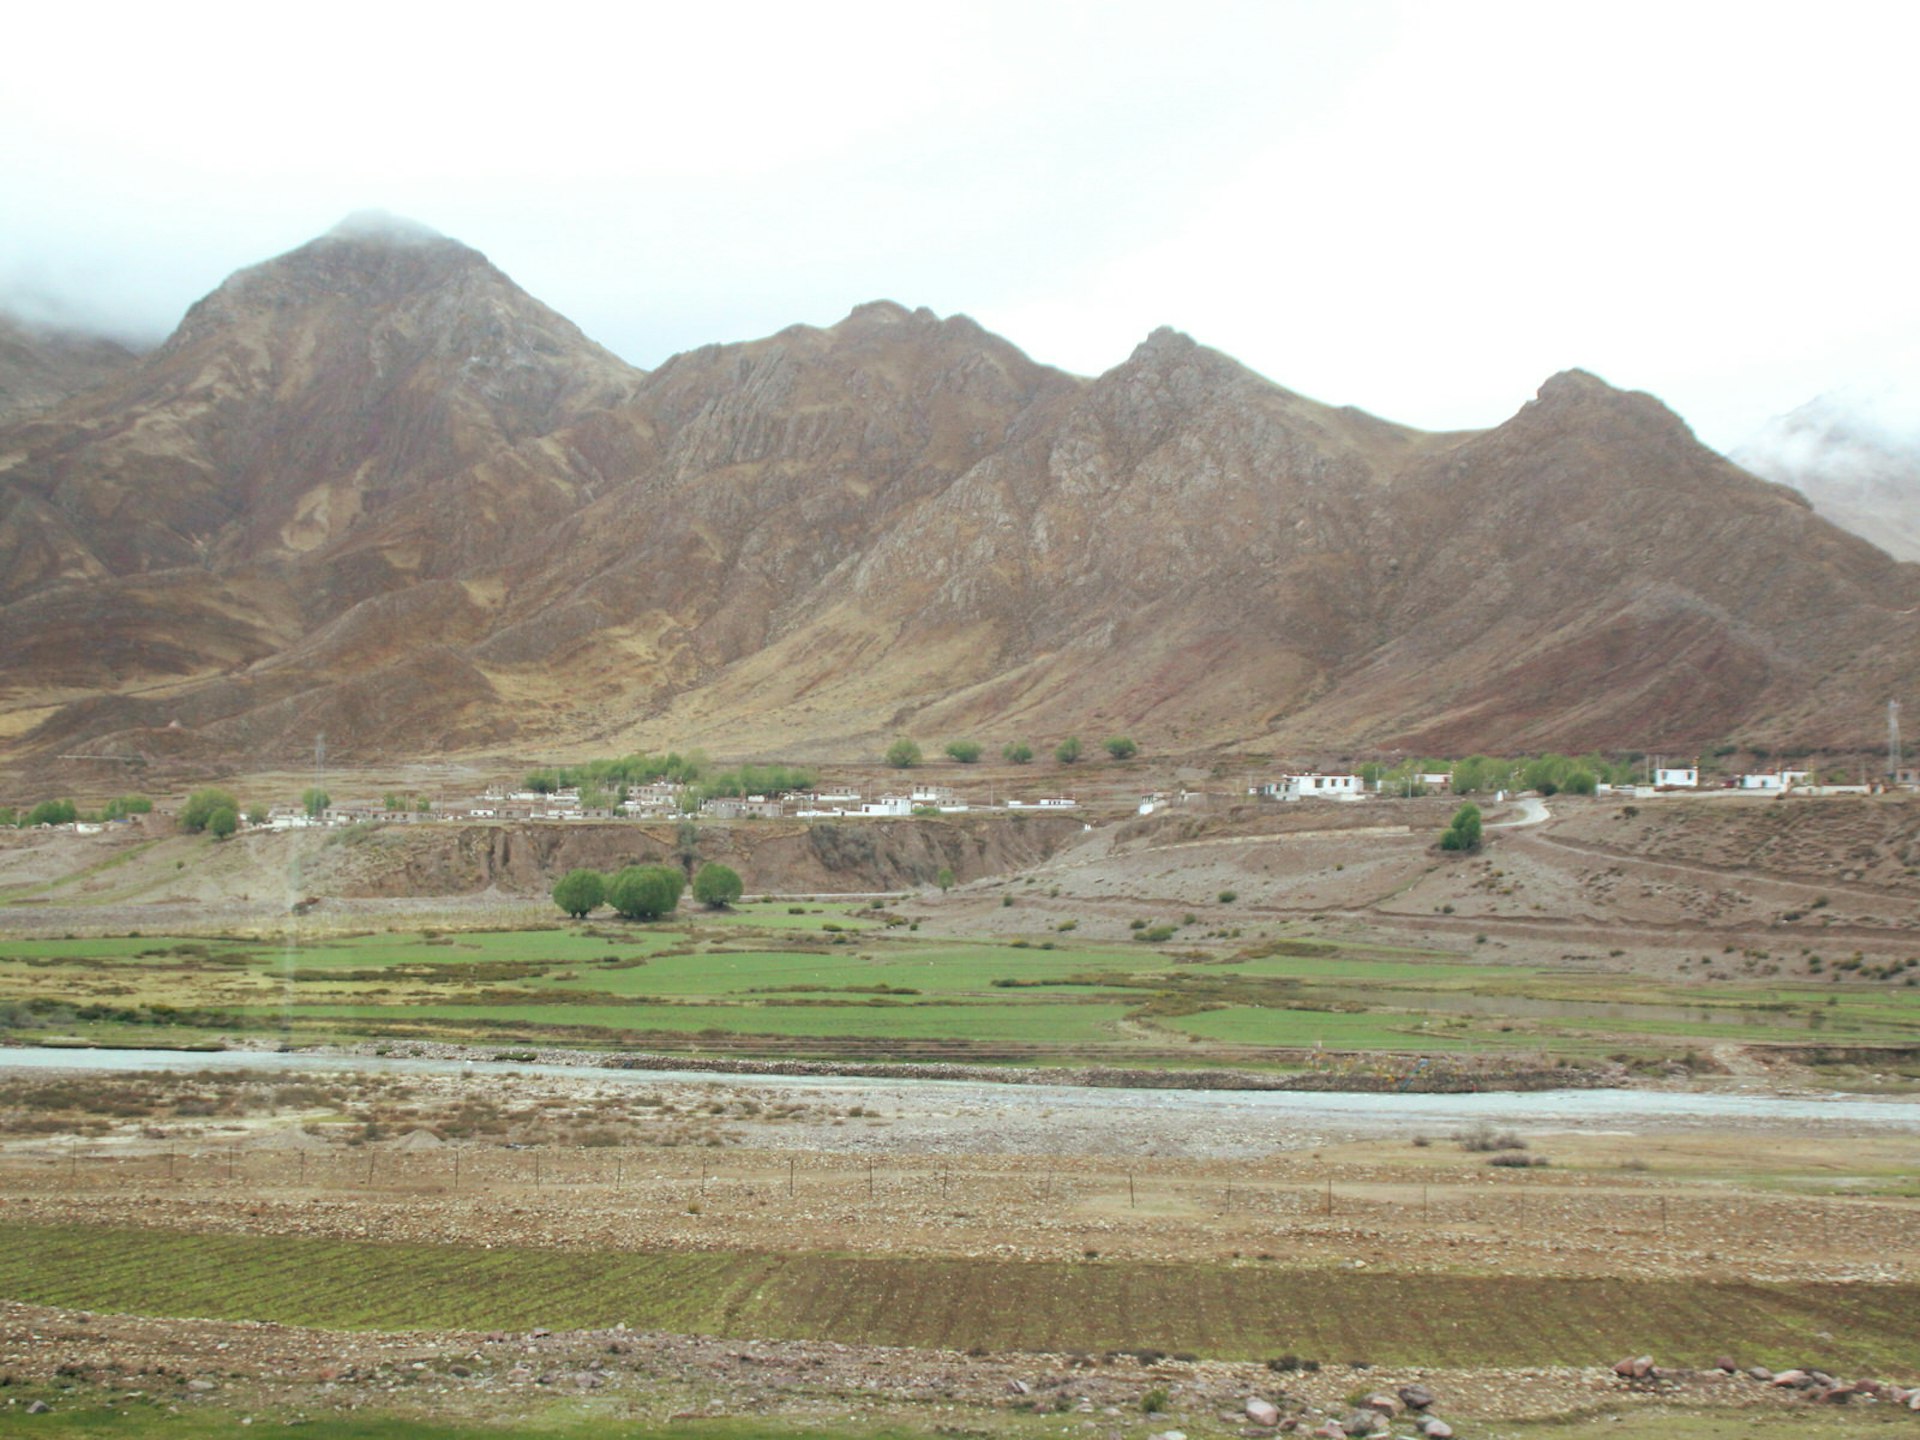 Tibetan villages and arid mountains visible from train windows © Nellie Huang / Lonely Planet